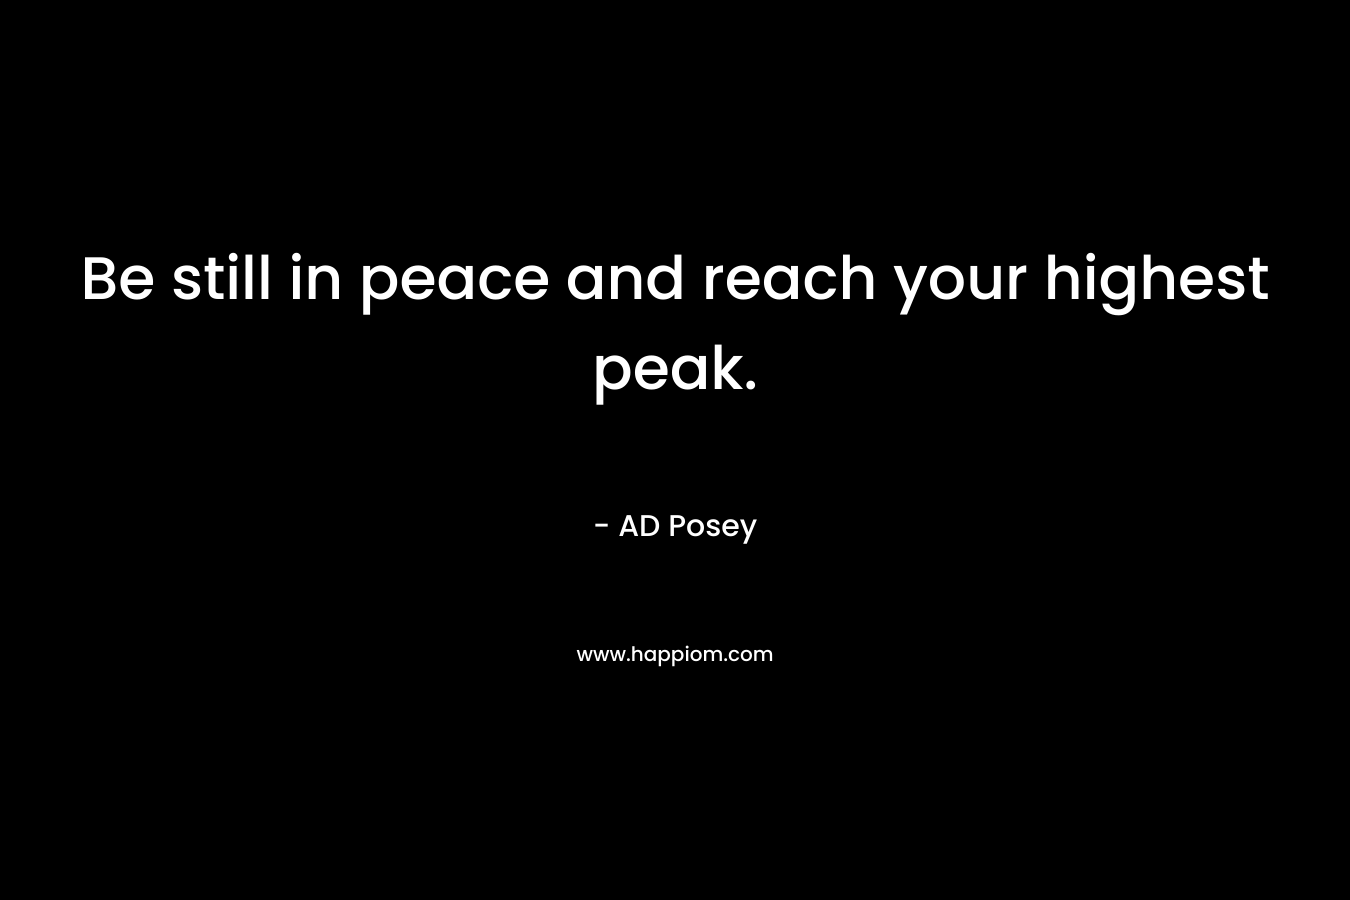 Be still in peace and reach your highest peak. – AD Posey